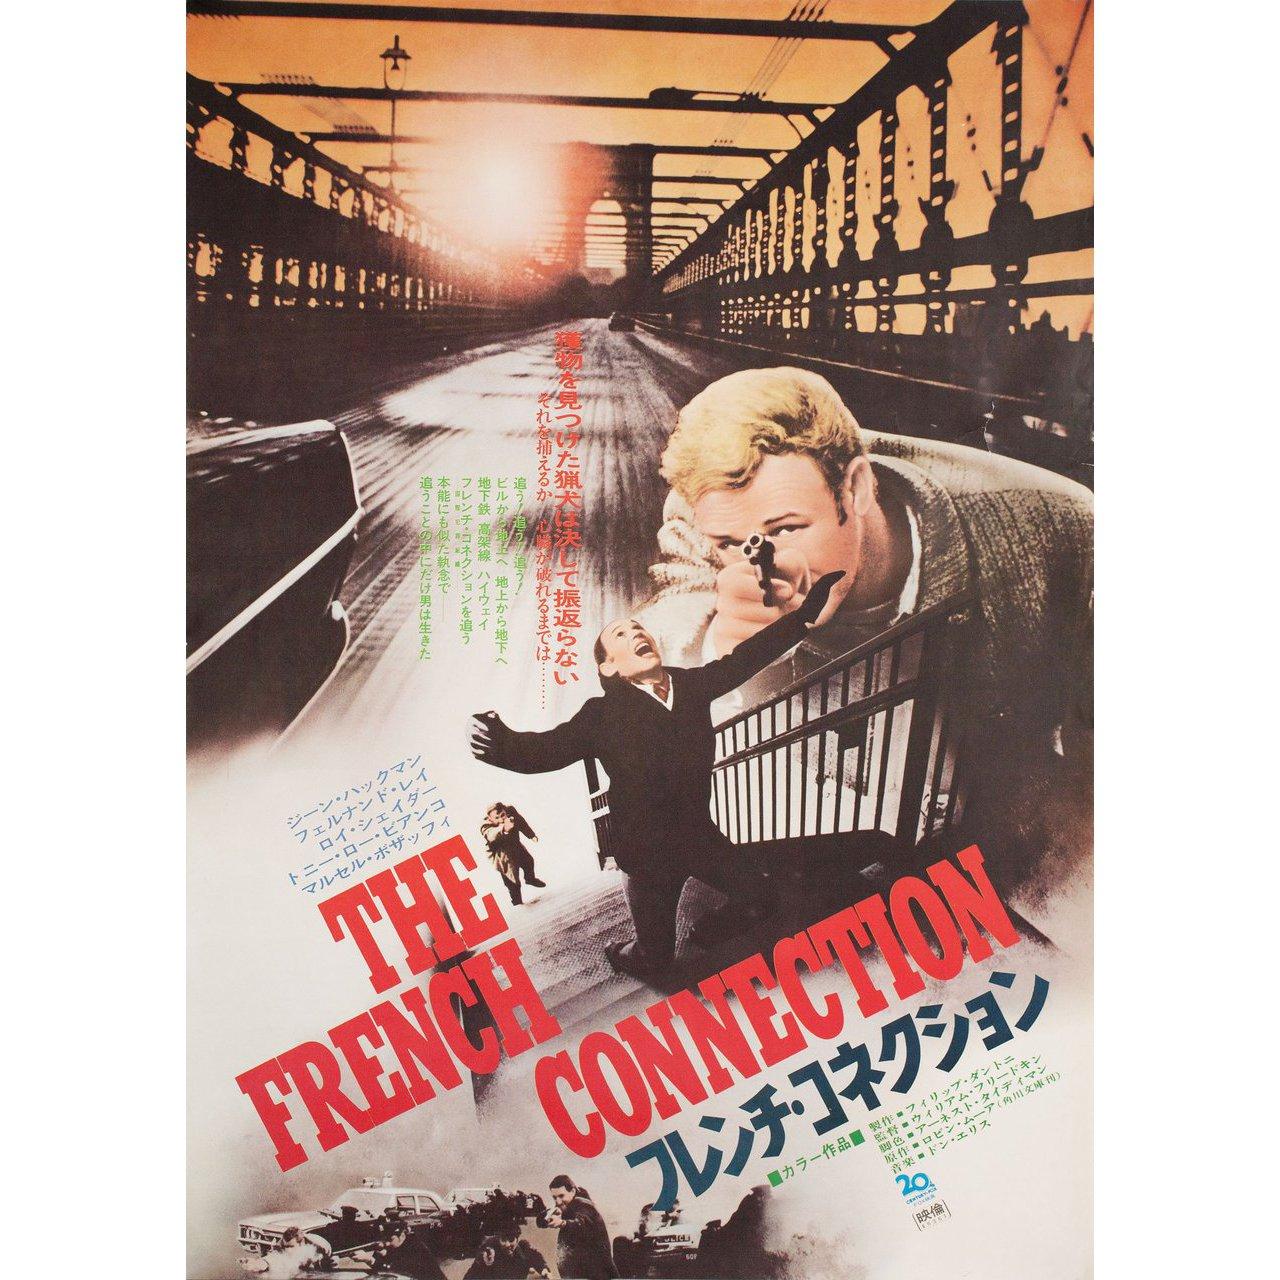 Original 1971 Japanese B2 poster for the film The French Connection directed by William Friedkin with Gene Hackman / Fernando Rey / Roy Scheider / Tony Lo Bianco. Very Good-Fine condition, folded. Many original posters were issued folded or were